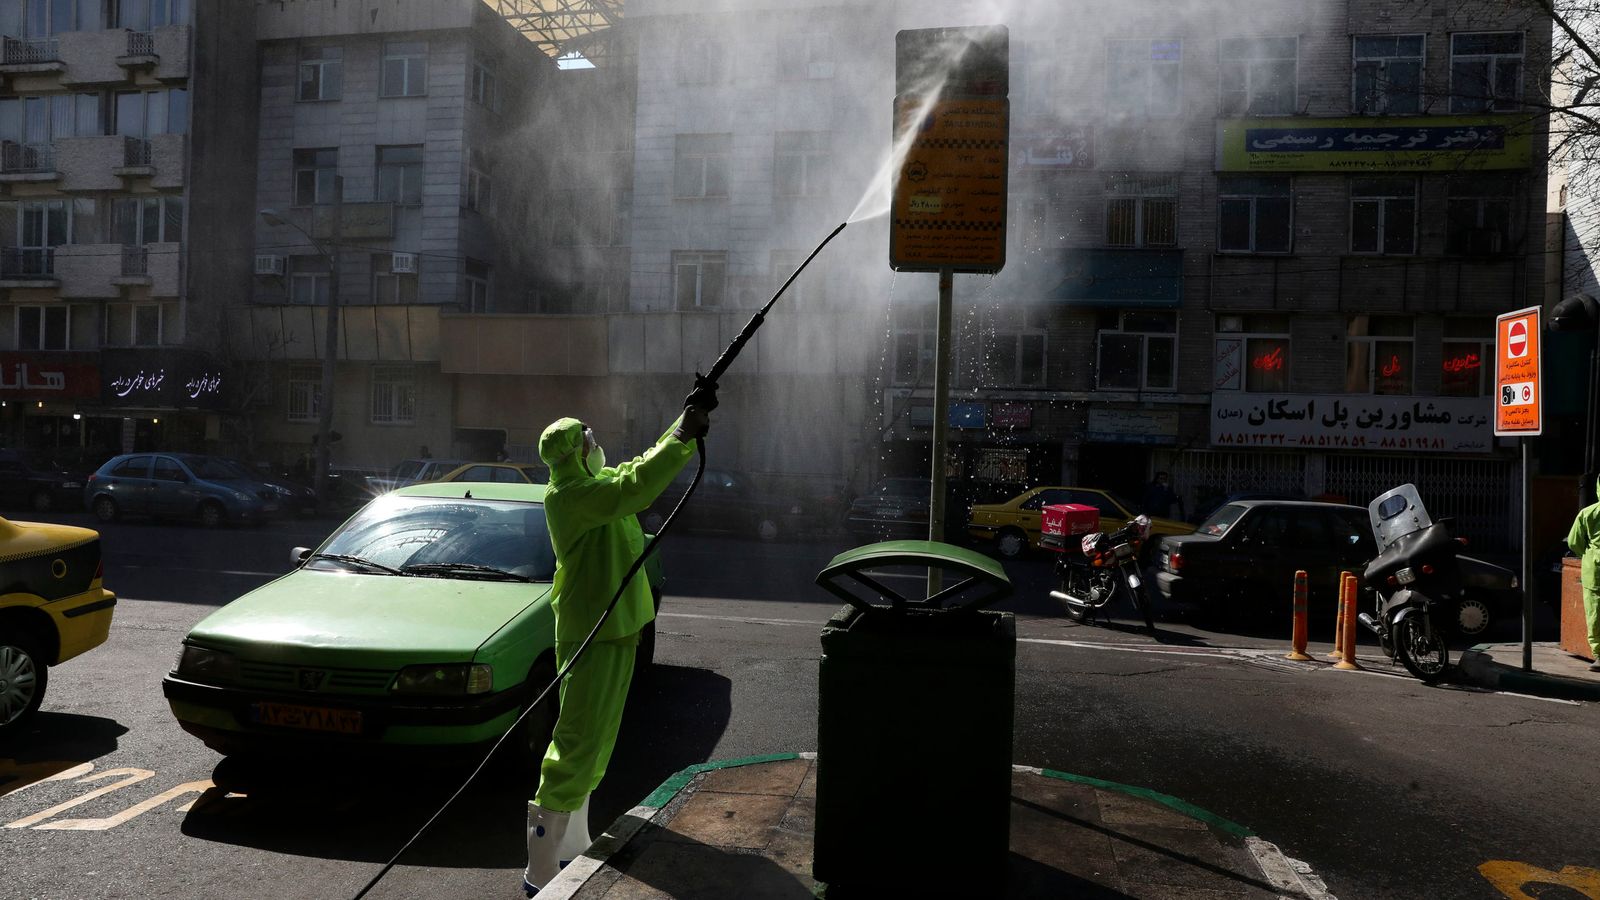 A city worker disinfects a bus stop sign during the coronavirus outbreak in Iran